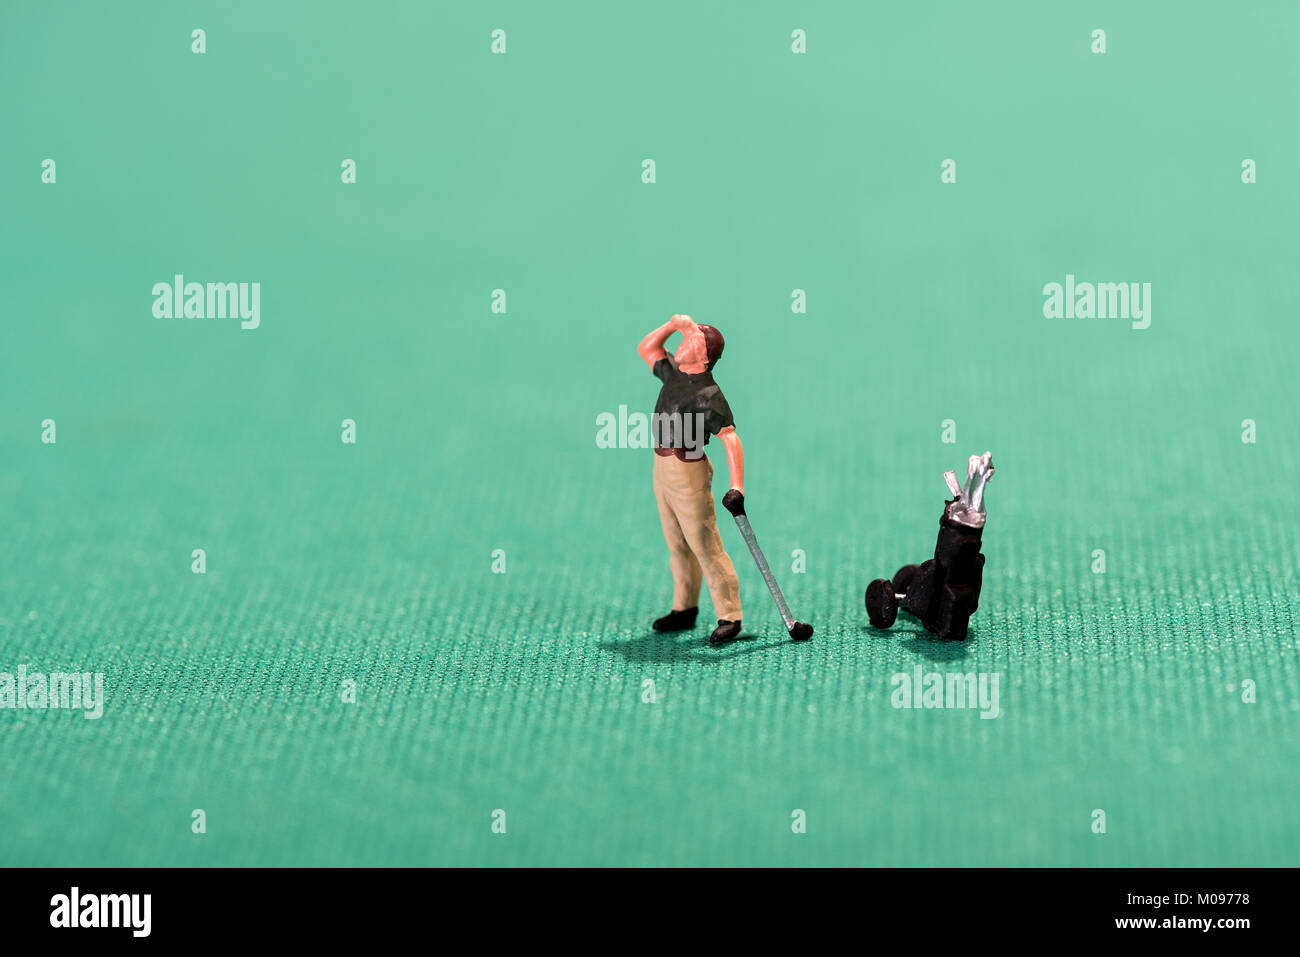 Miniature figure of a golfer peering into the distance after playing a stroke to see where his ball lands with his bag of clubs on a green background Stock Photo